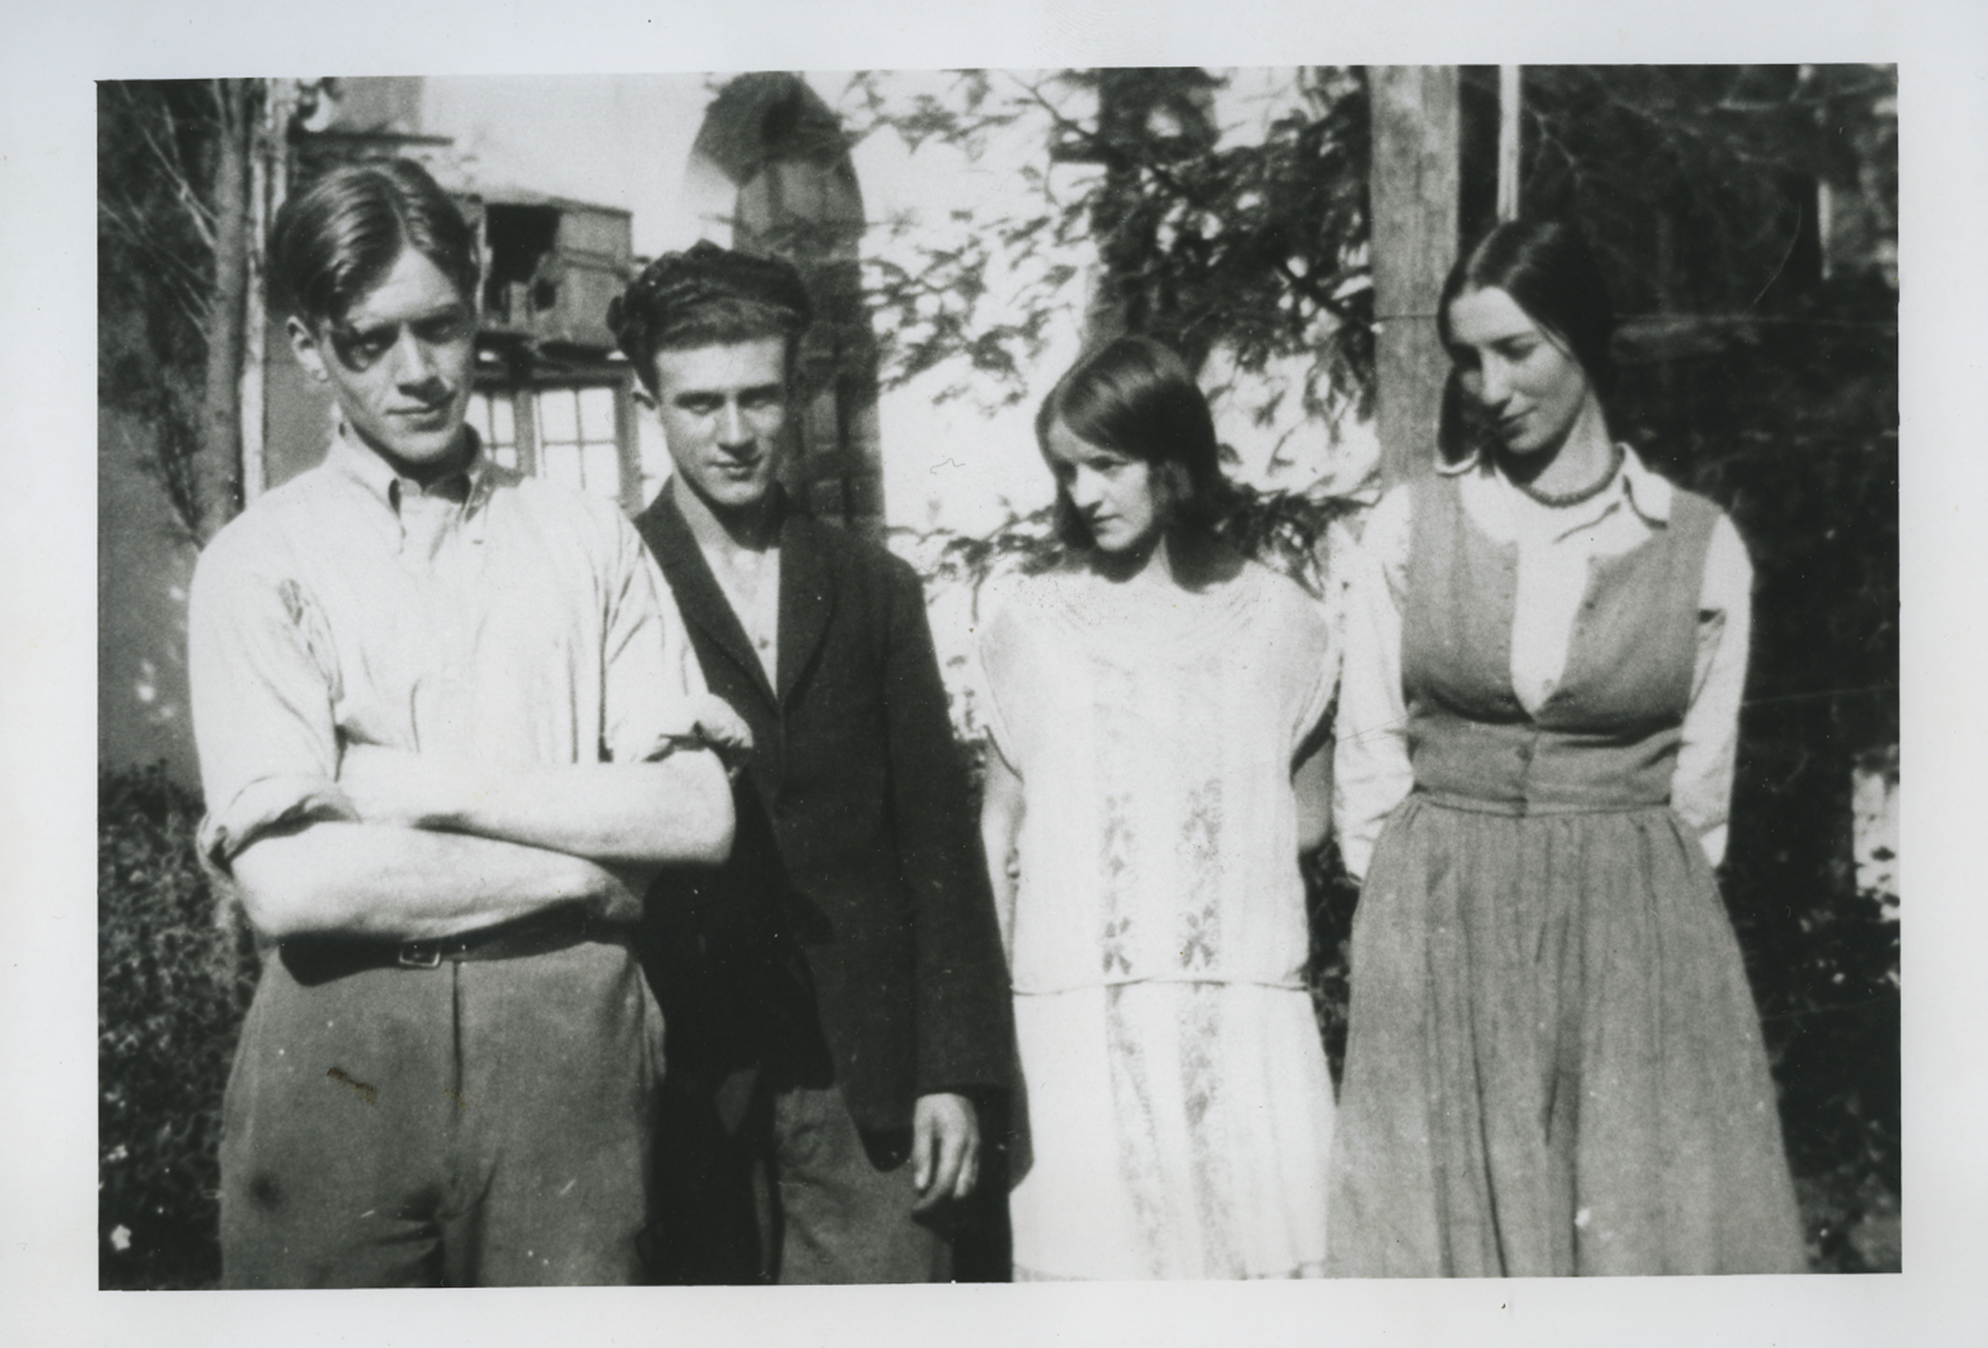 Winifred Knights (right), with Barbara Hepworth, J. R. Skeaping, and Tom Monnington (left), BSR Courtyard, 1925. BSR Fine Arts Archive